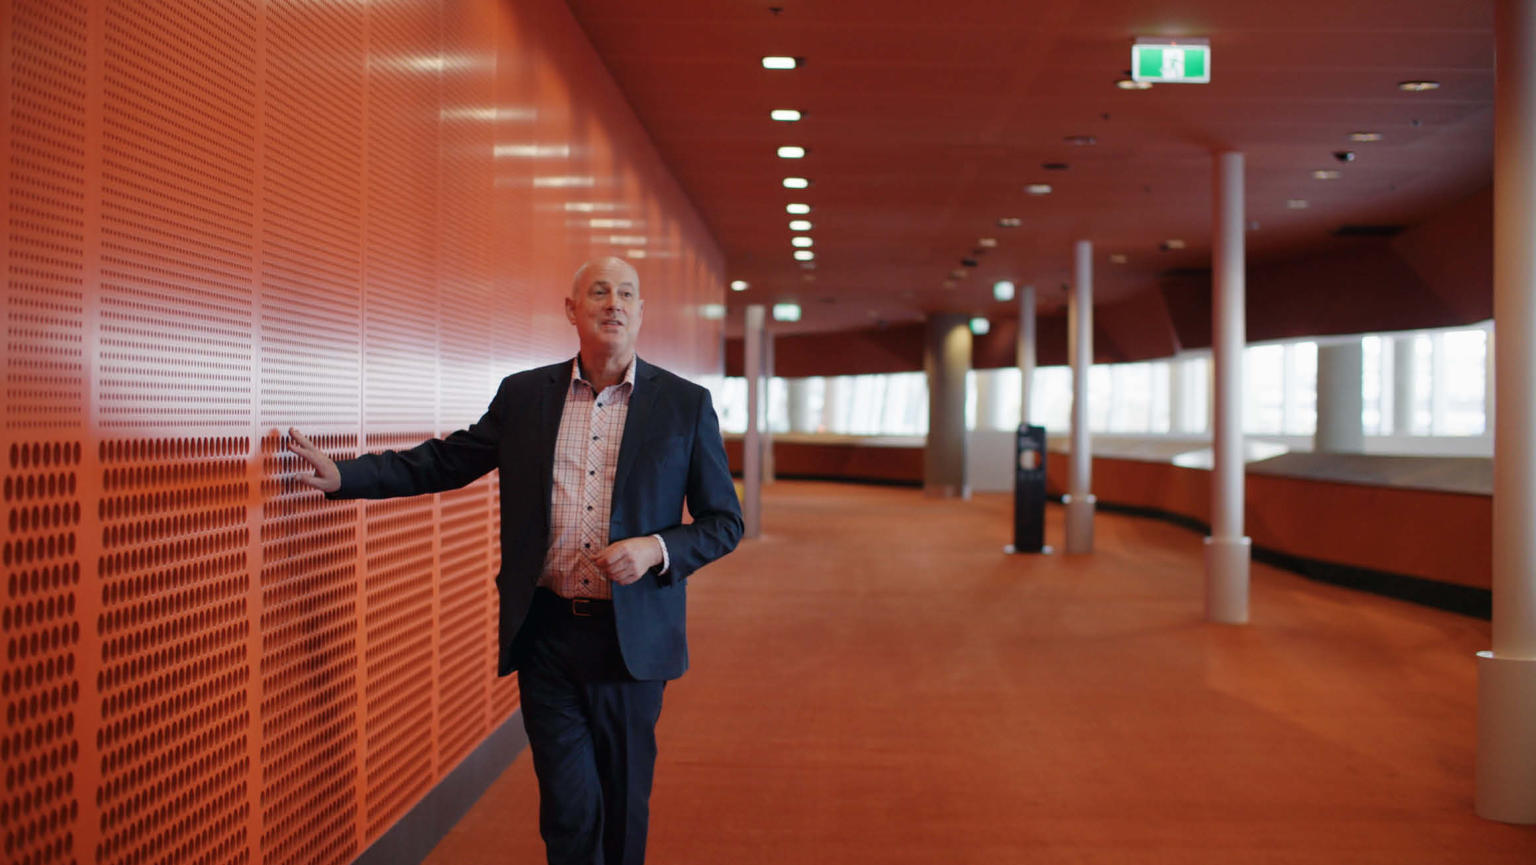 David Howie, a man in a suit, walking along the foyer in the MCEC (Melbourne Convention and Exhibition Centre) building. He is seen touching the orange wall.